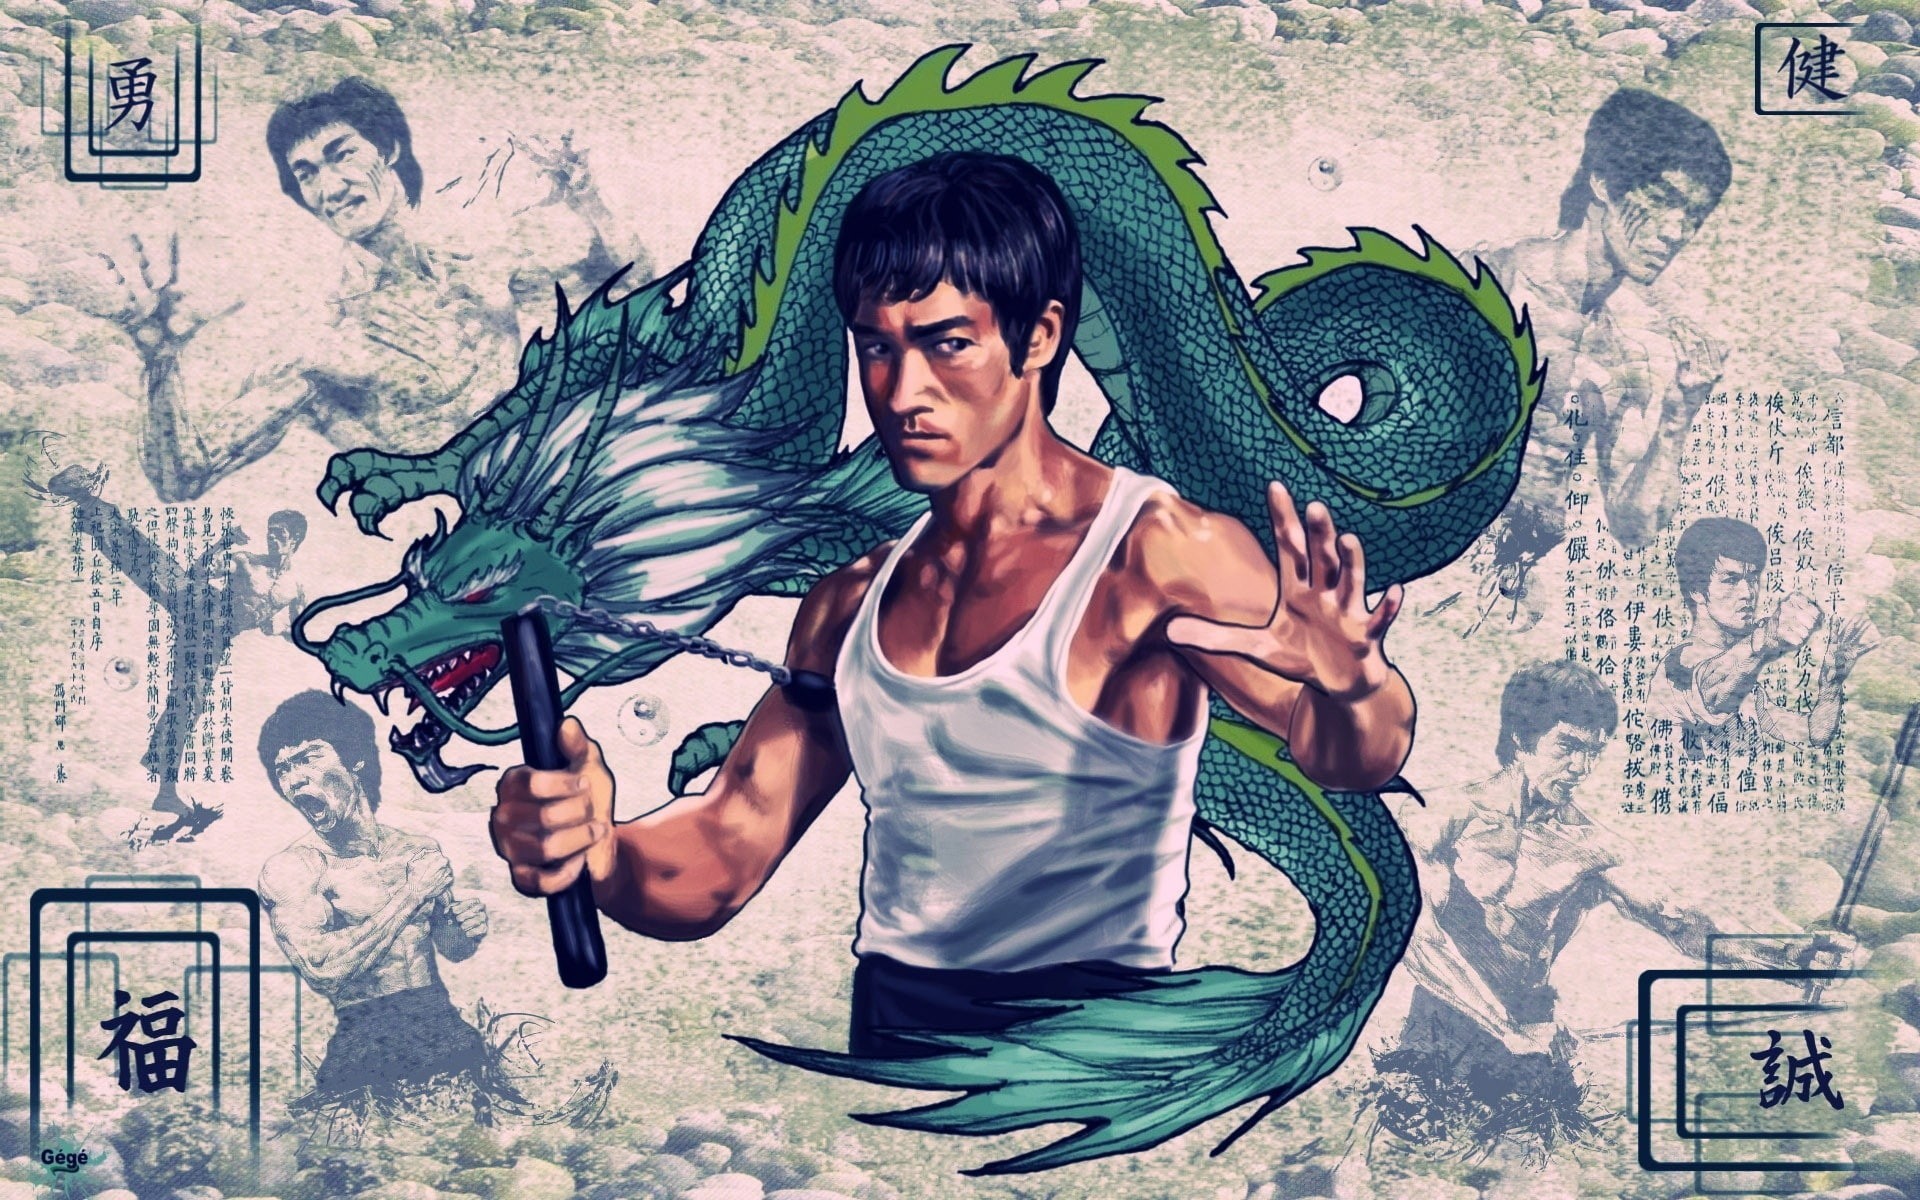 Wallpaper / 1080P, poster, chinese, vintage, lee, bruce, dragons free download